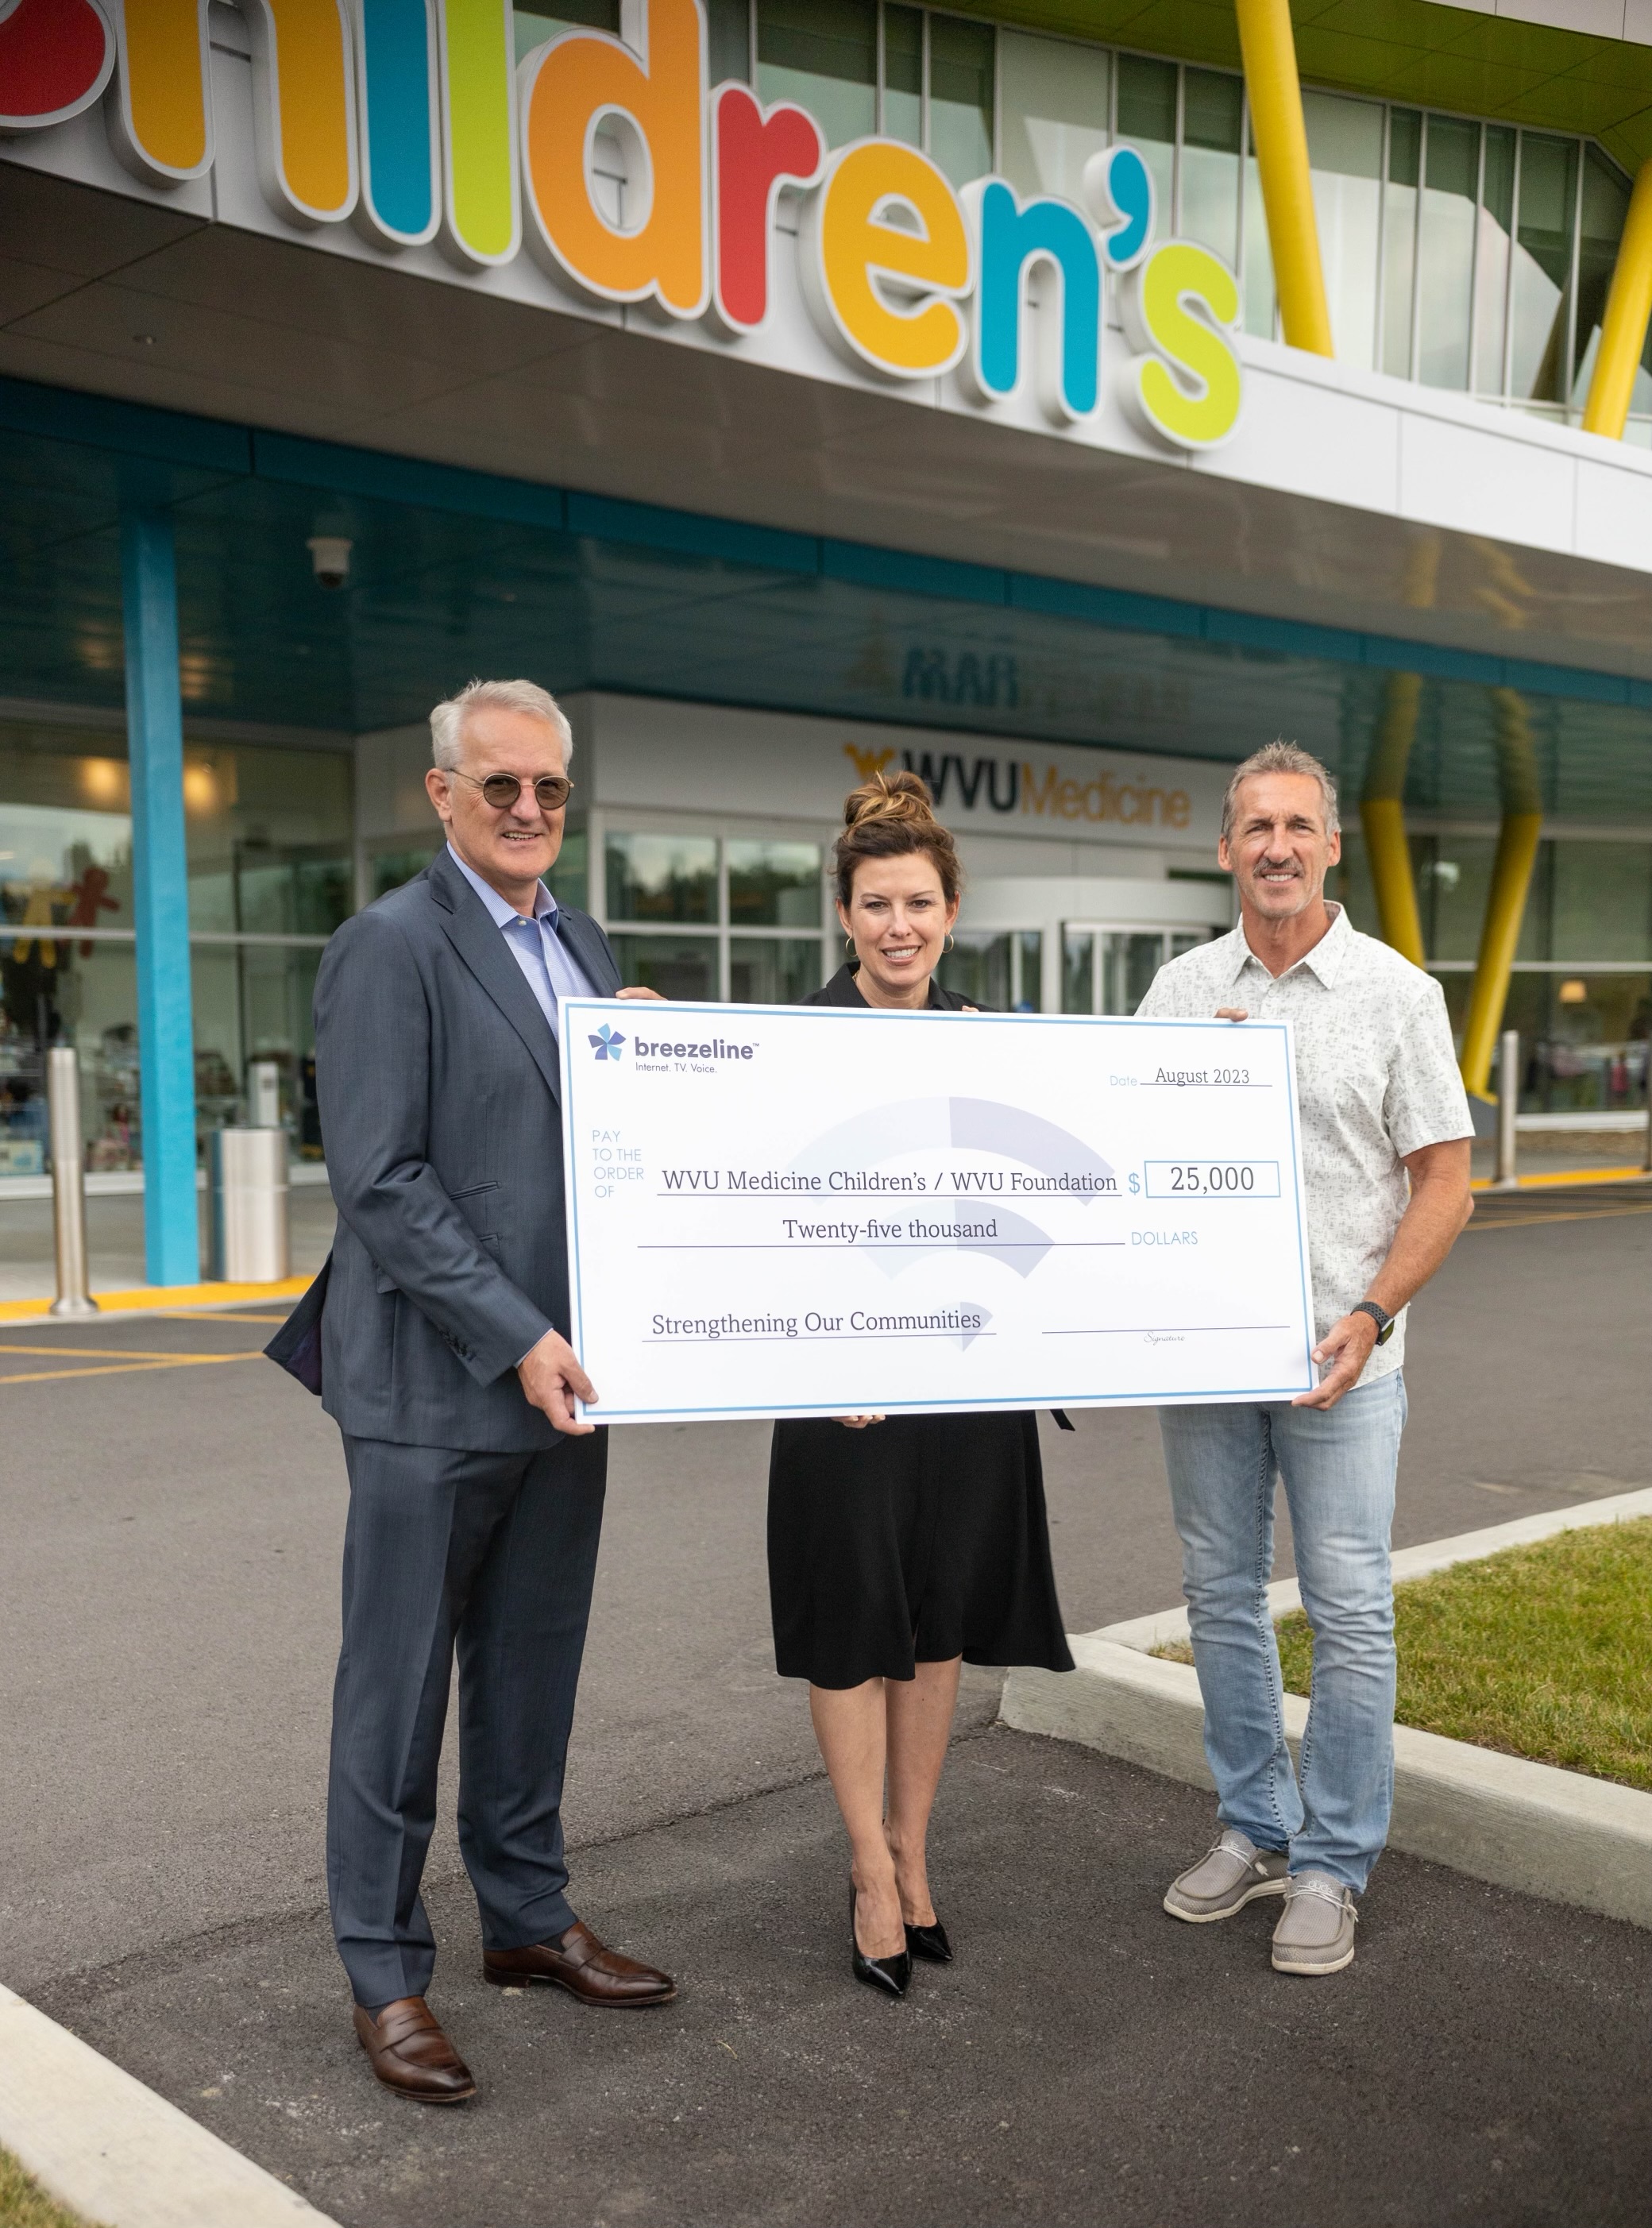 Breezeline supports WVU Medicine Children’s Hospital with $25K donation and tablet computers